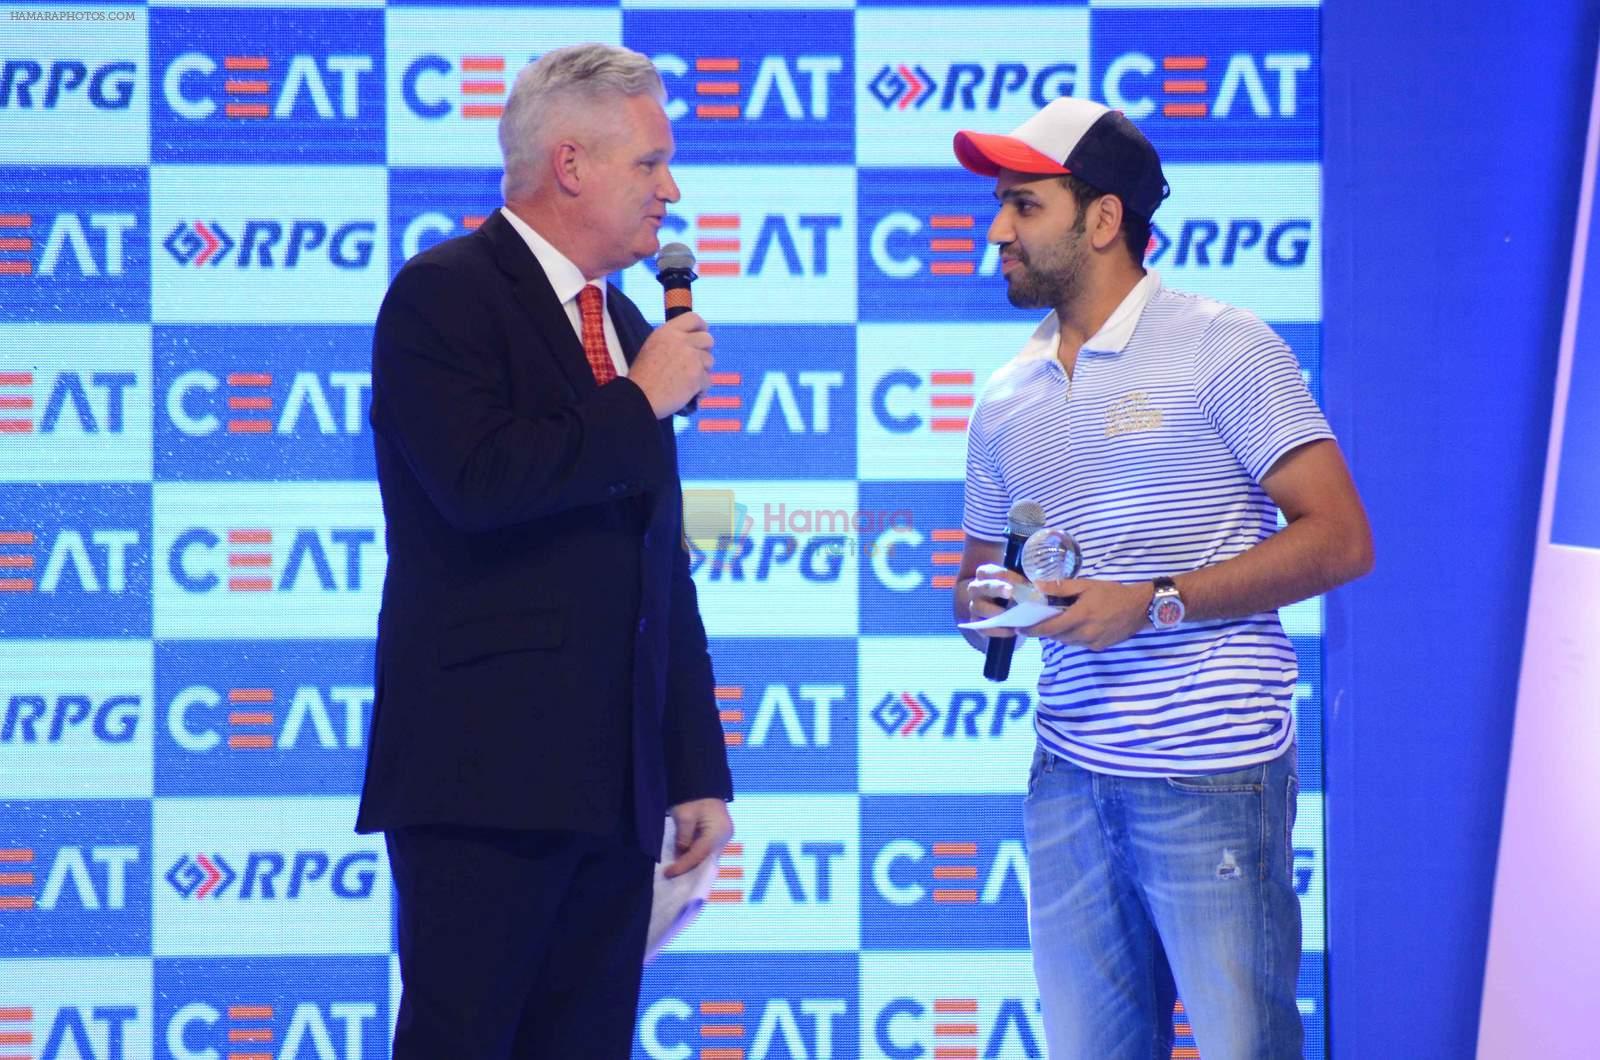 at Ceat Cricket Awards in Trident, Mumbai on 25th May 2015